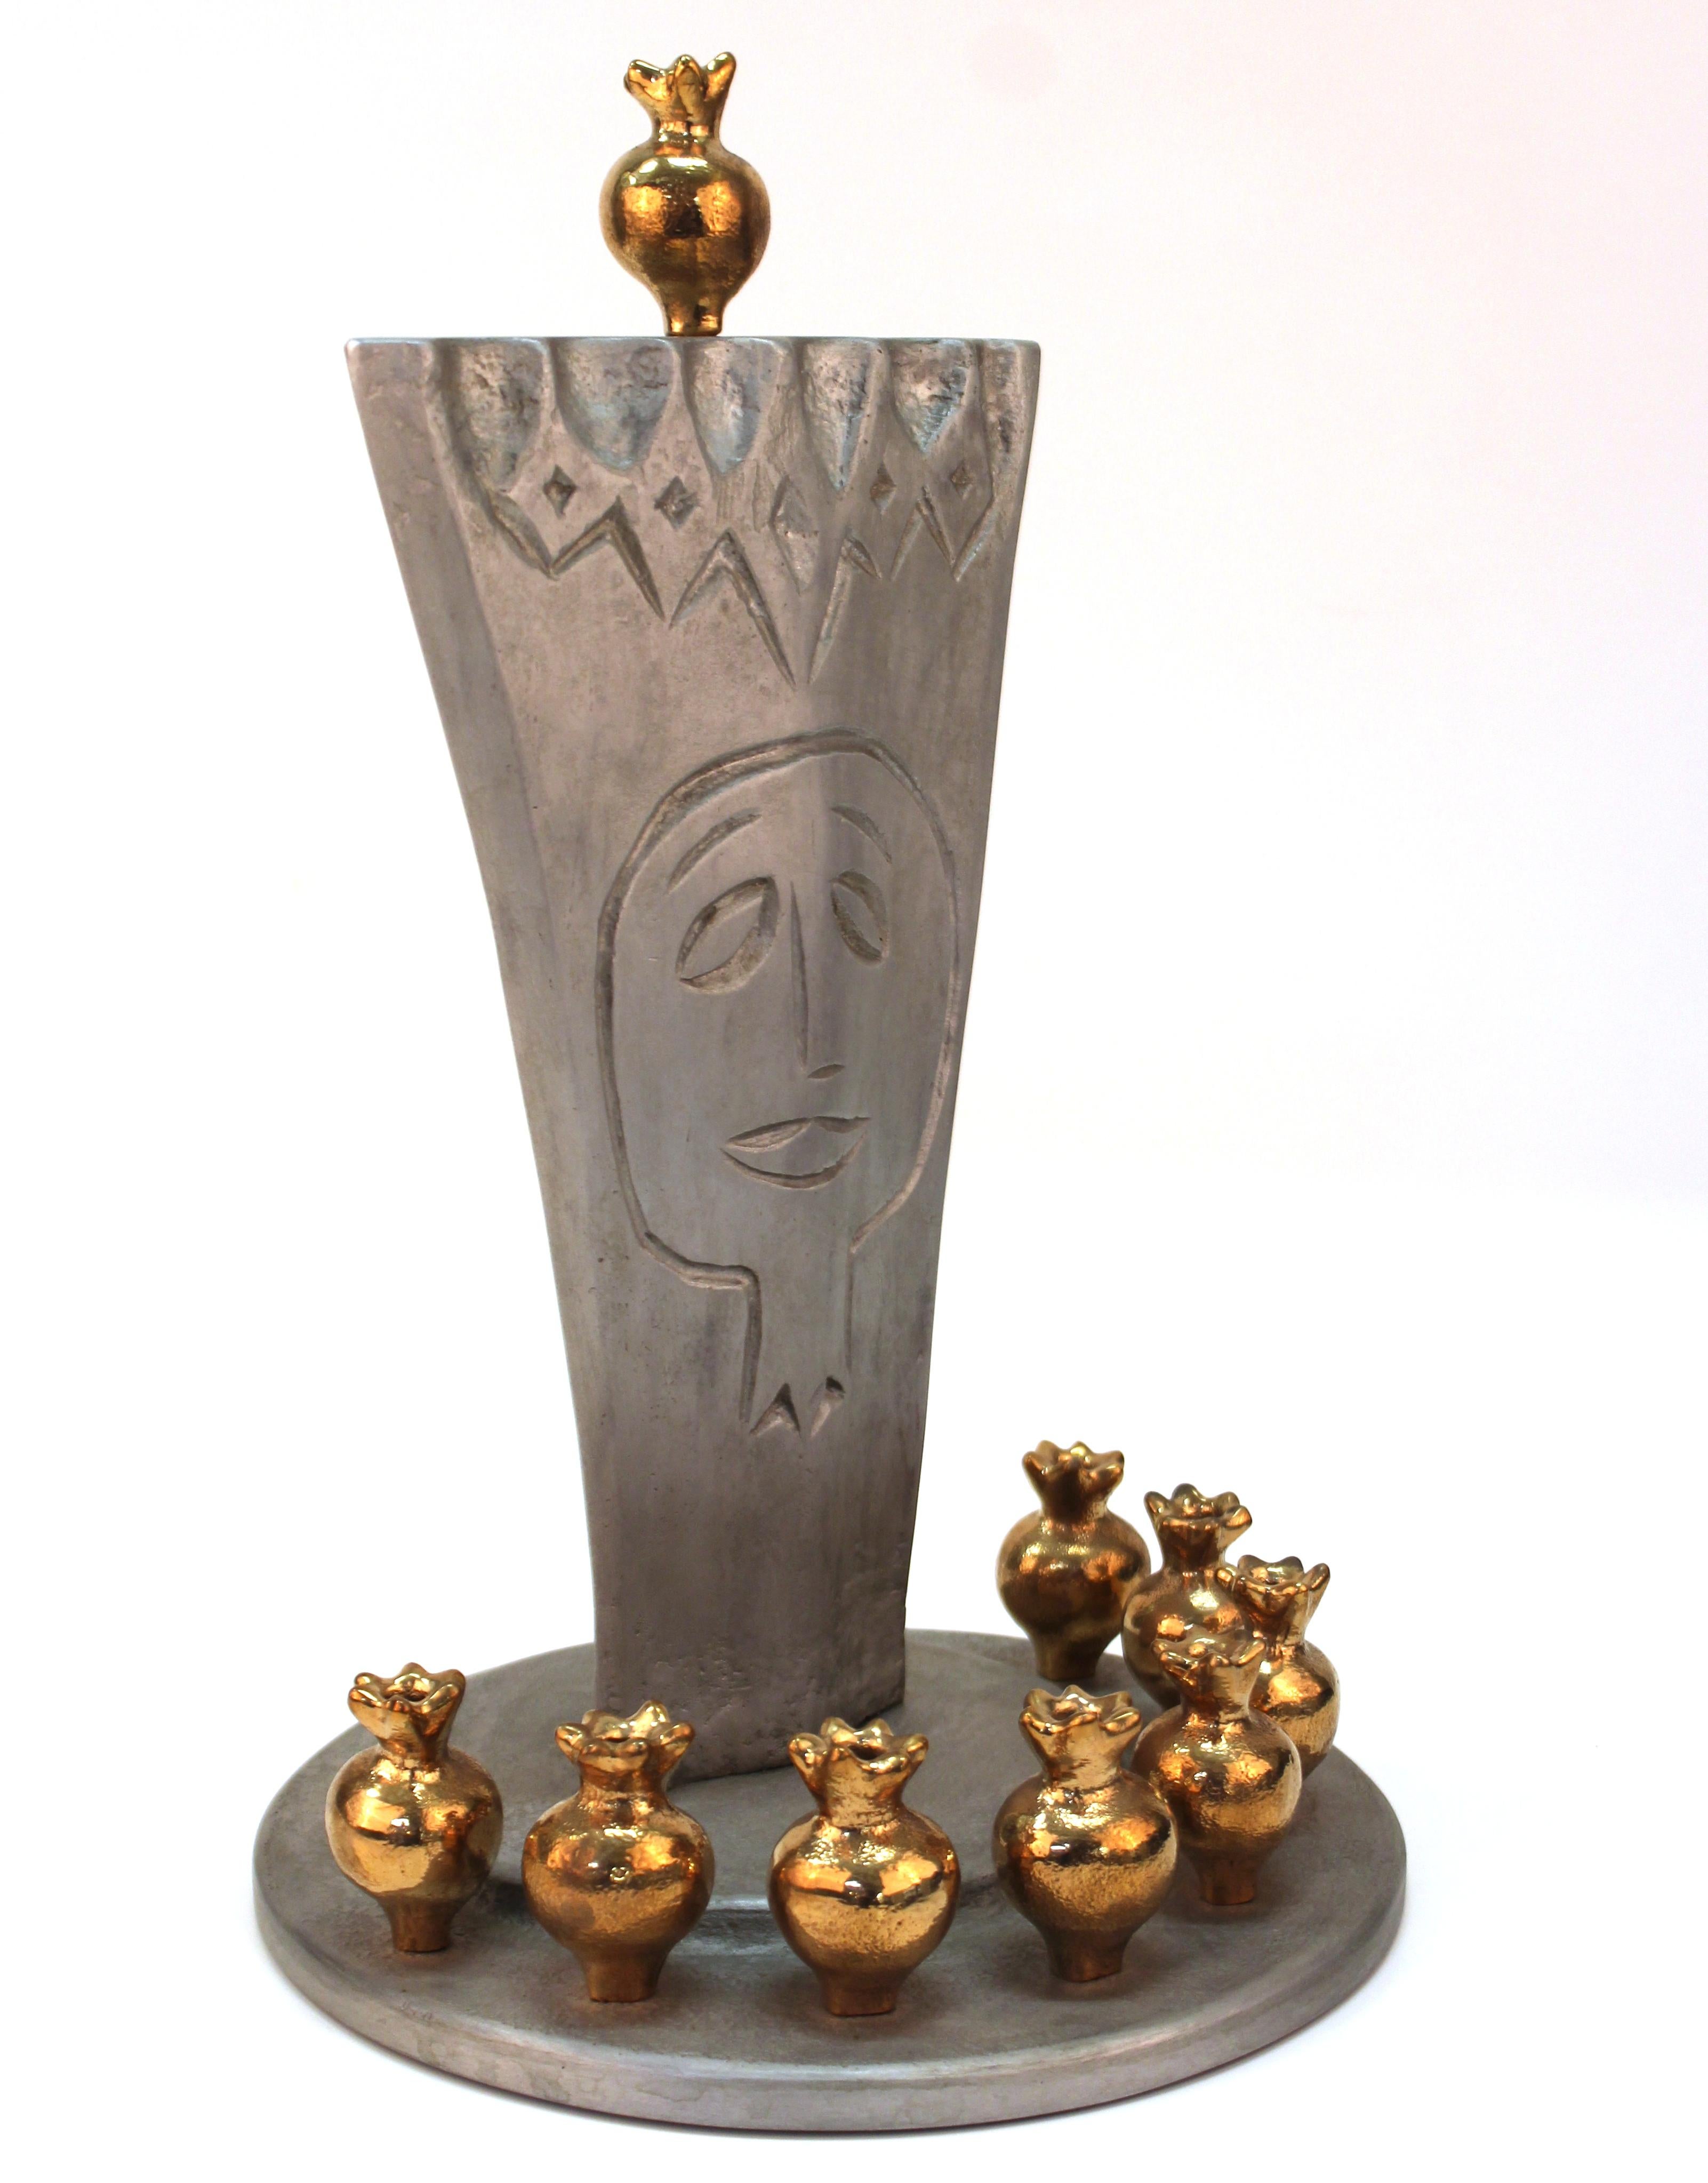 Modern bronze and cast aluminum menorah by Oded Halahmy, titled 'My Own Light', created in 2010. Marked by the artist and dated on the base. In great vintage condition.